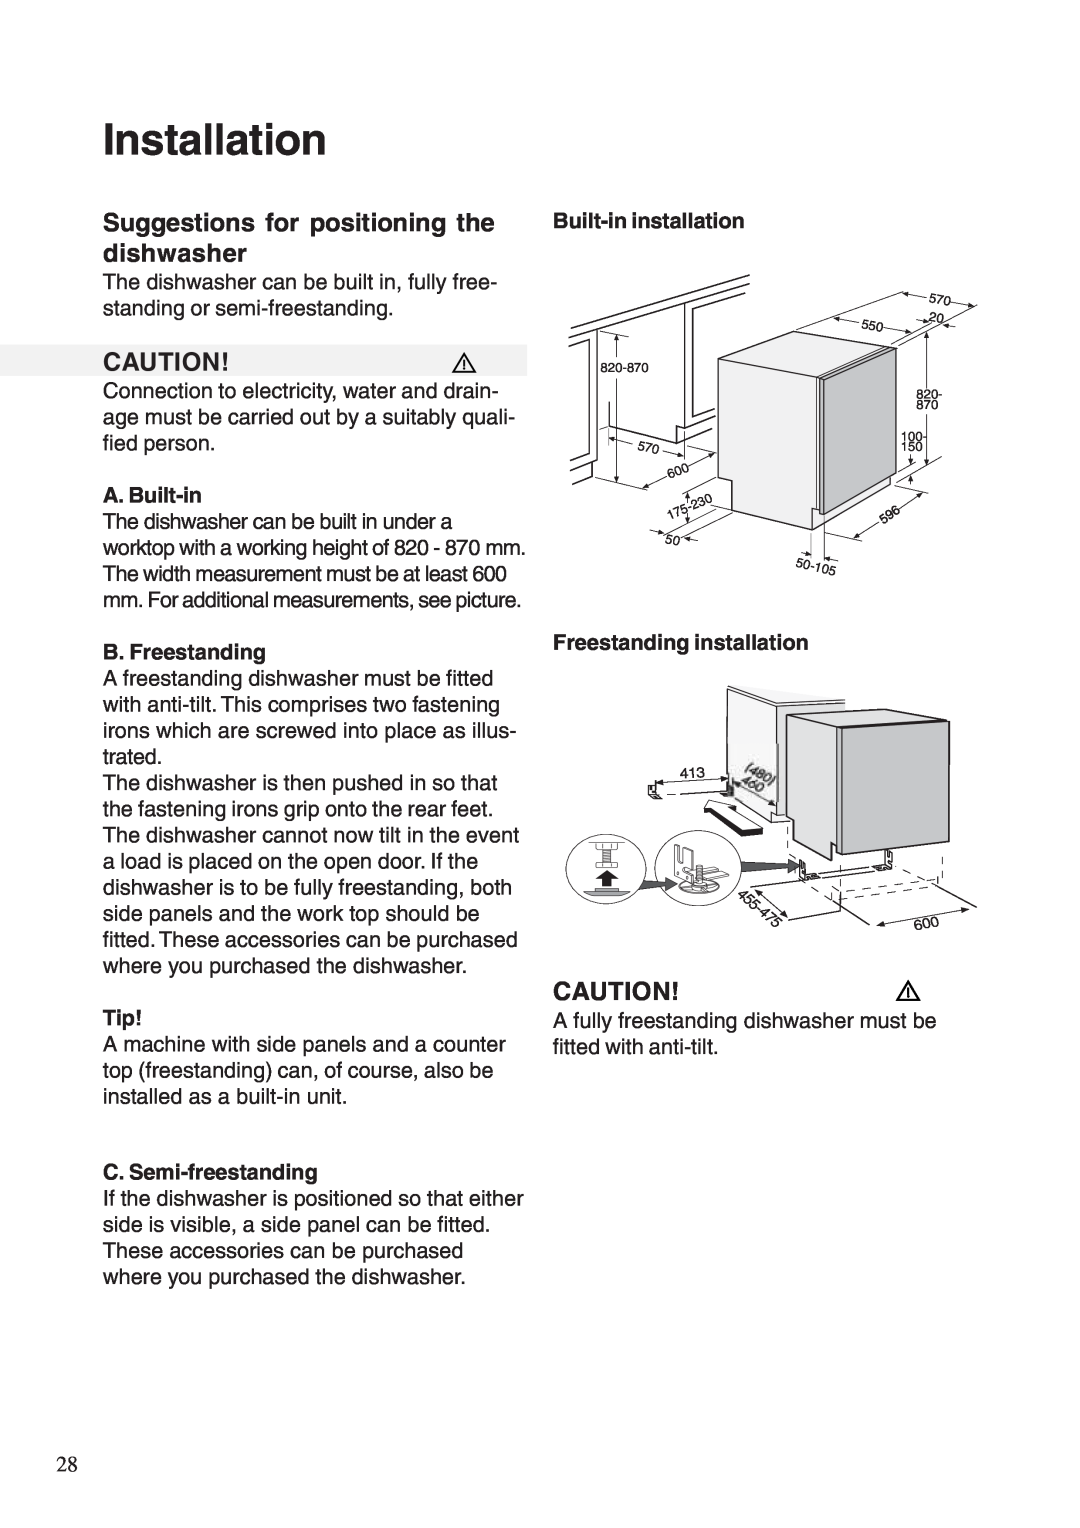 Maytag 661S/W manual Installation, Suggestions for positioning the dishwasher, A. Built-in, Built-in installation 